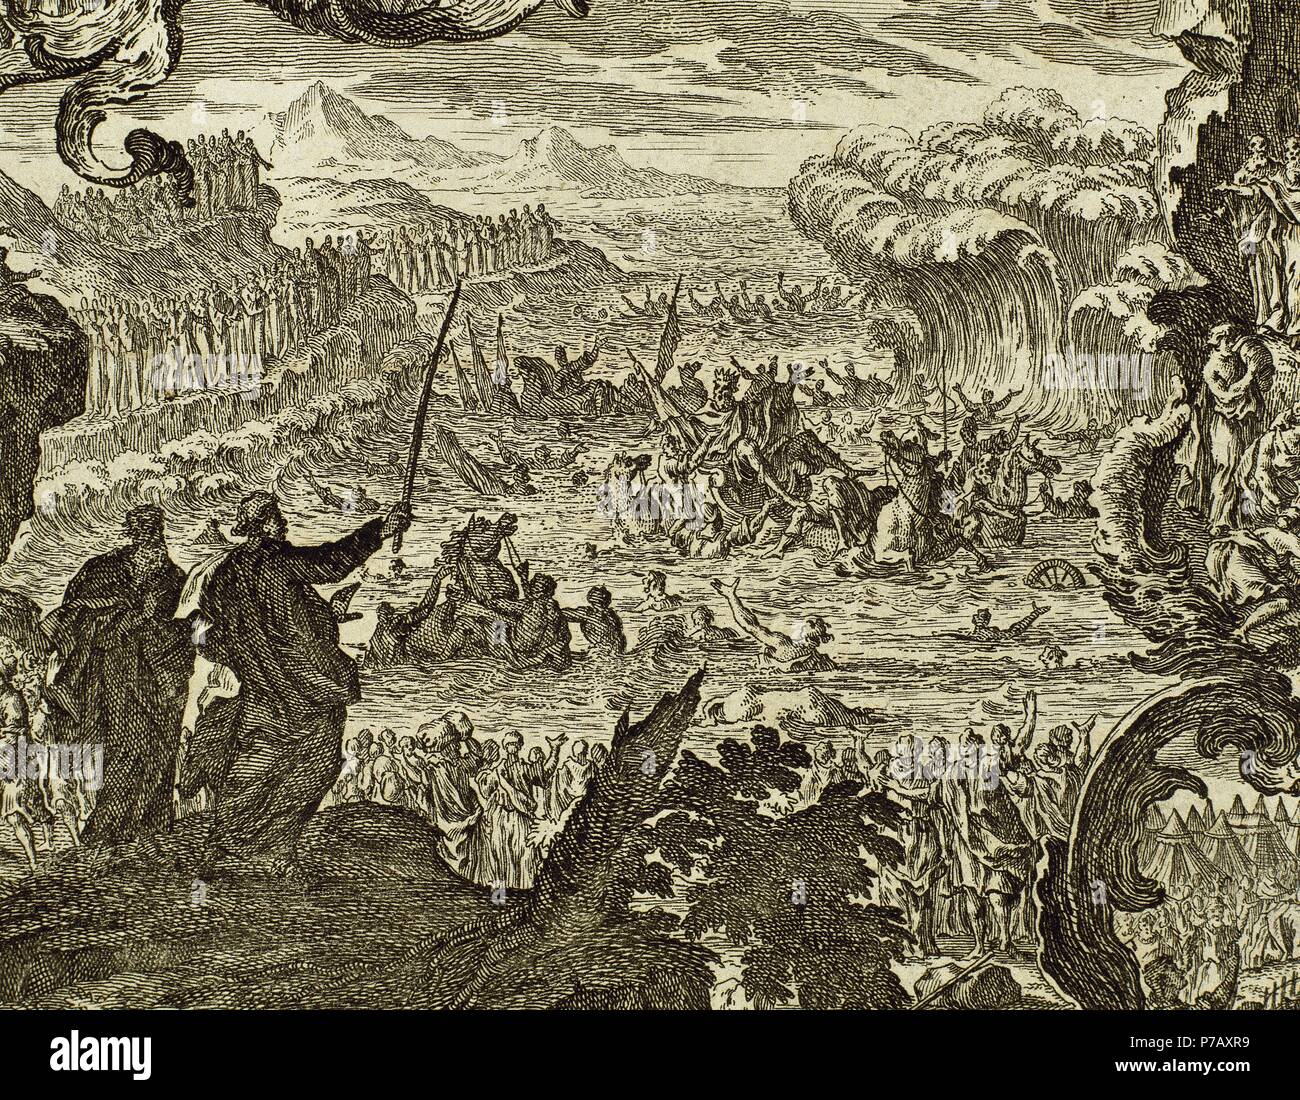 Parting of the waters of the Red Sea. Book of Exodus. Chapter 15, verse 1. Engraving. Stock Photo